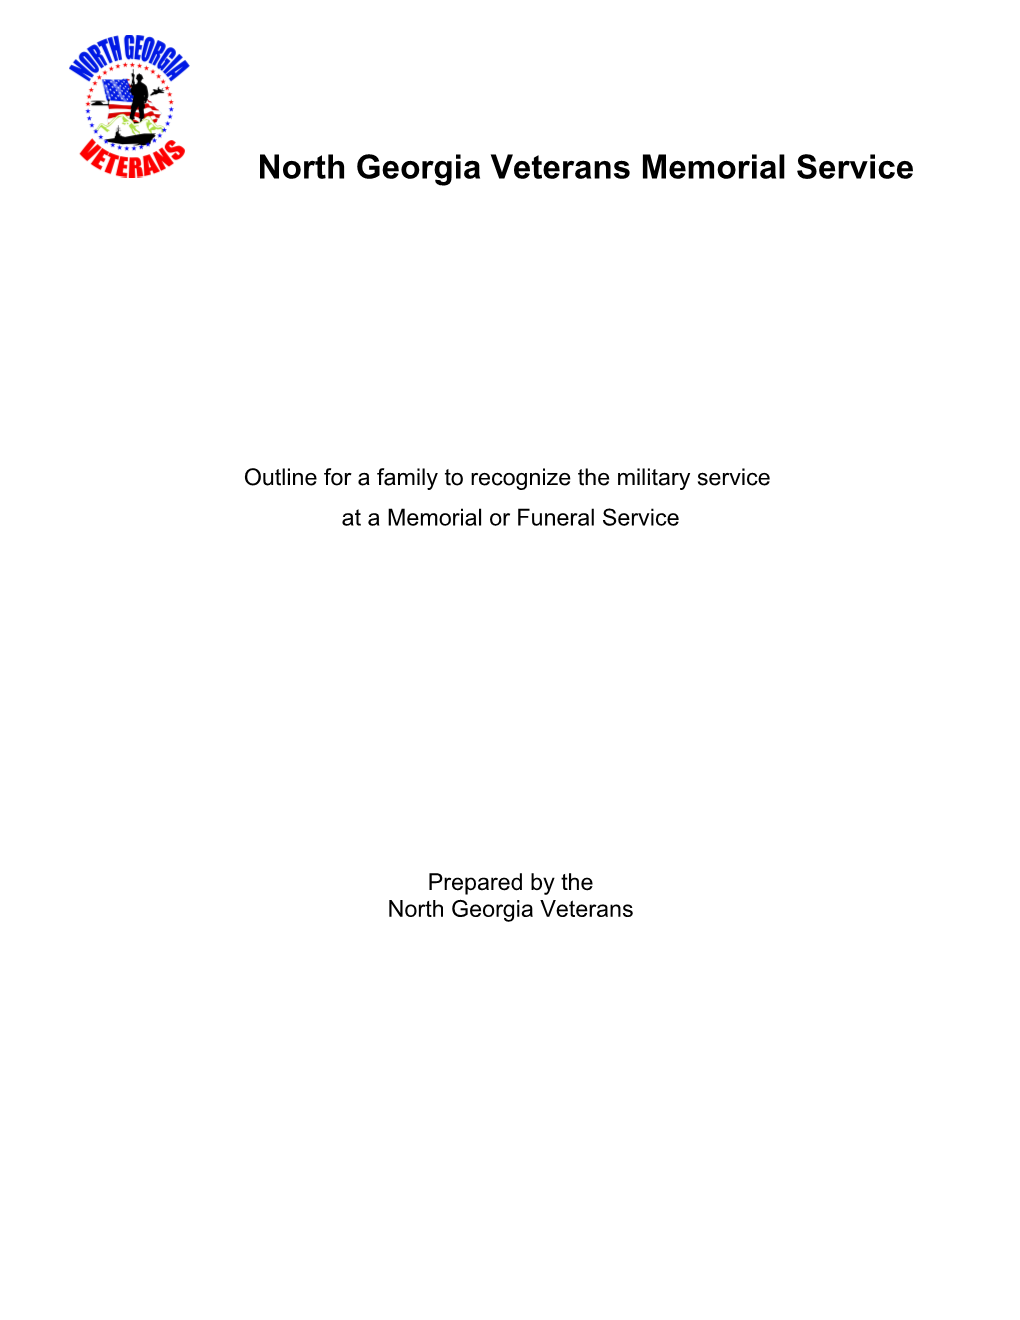 Outline for a Family to Recognize the Military Service at a Memorial Or Funeral Service